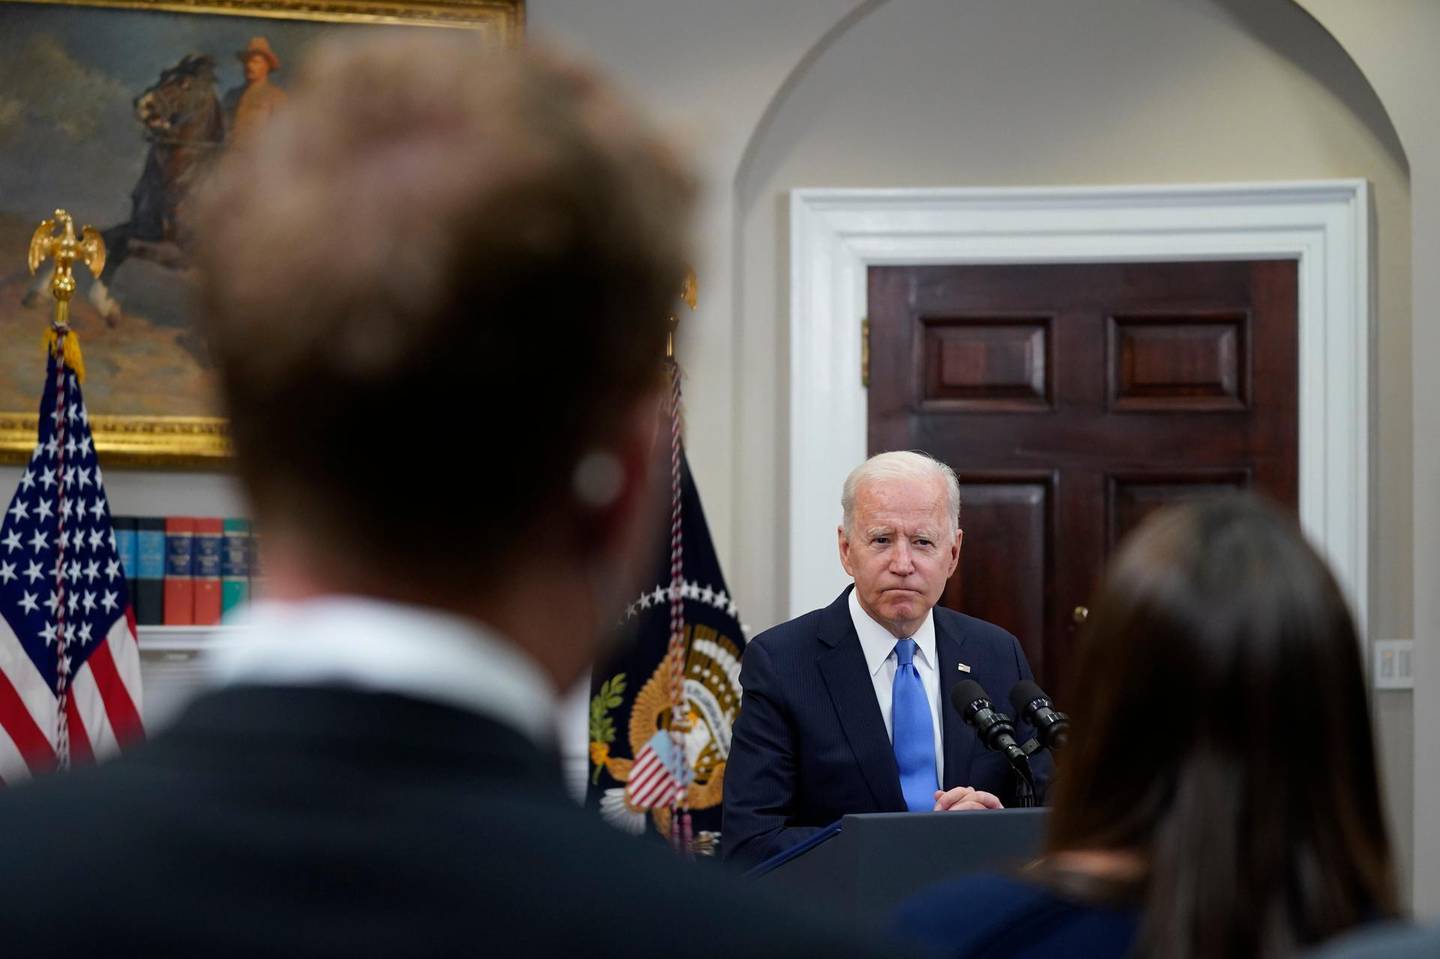 FILE - In this May 13, 2021, file photo President Joe Biden responds to questions from the media after delivering remarks about the Colonial Pipeline hack, in the Roosevelt Room of the White House in Washington. The Centers for Disease Control and Prevention said Thursday that fully vaccinated people â€” those who are two weeks past their last required dose of a COVID-19 vaccine â€” can stop wearing masks outdoors in crowds and in most indoor settings. Across Washington, the government is adjusting in a variety of ways to new federal guidance easing up on when face masks should be worn. (AP Photo/Evan Vucci, File)